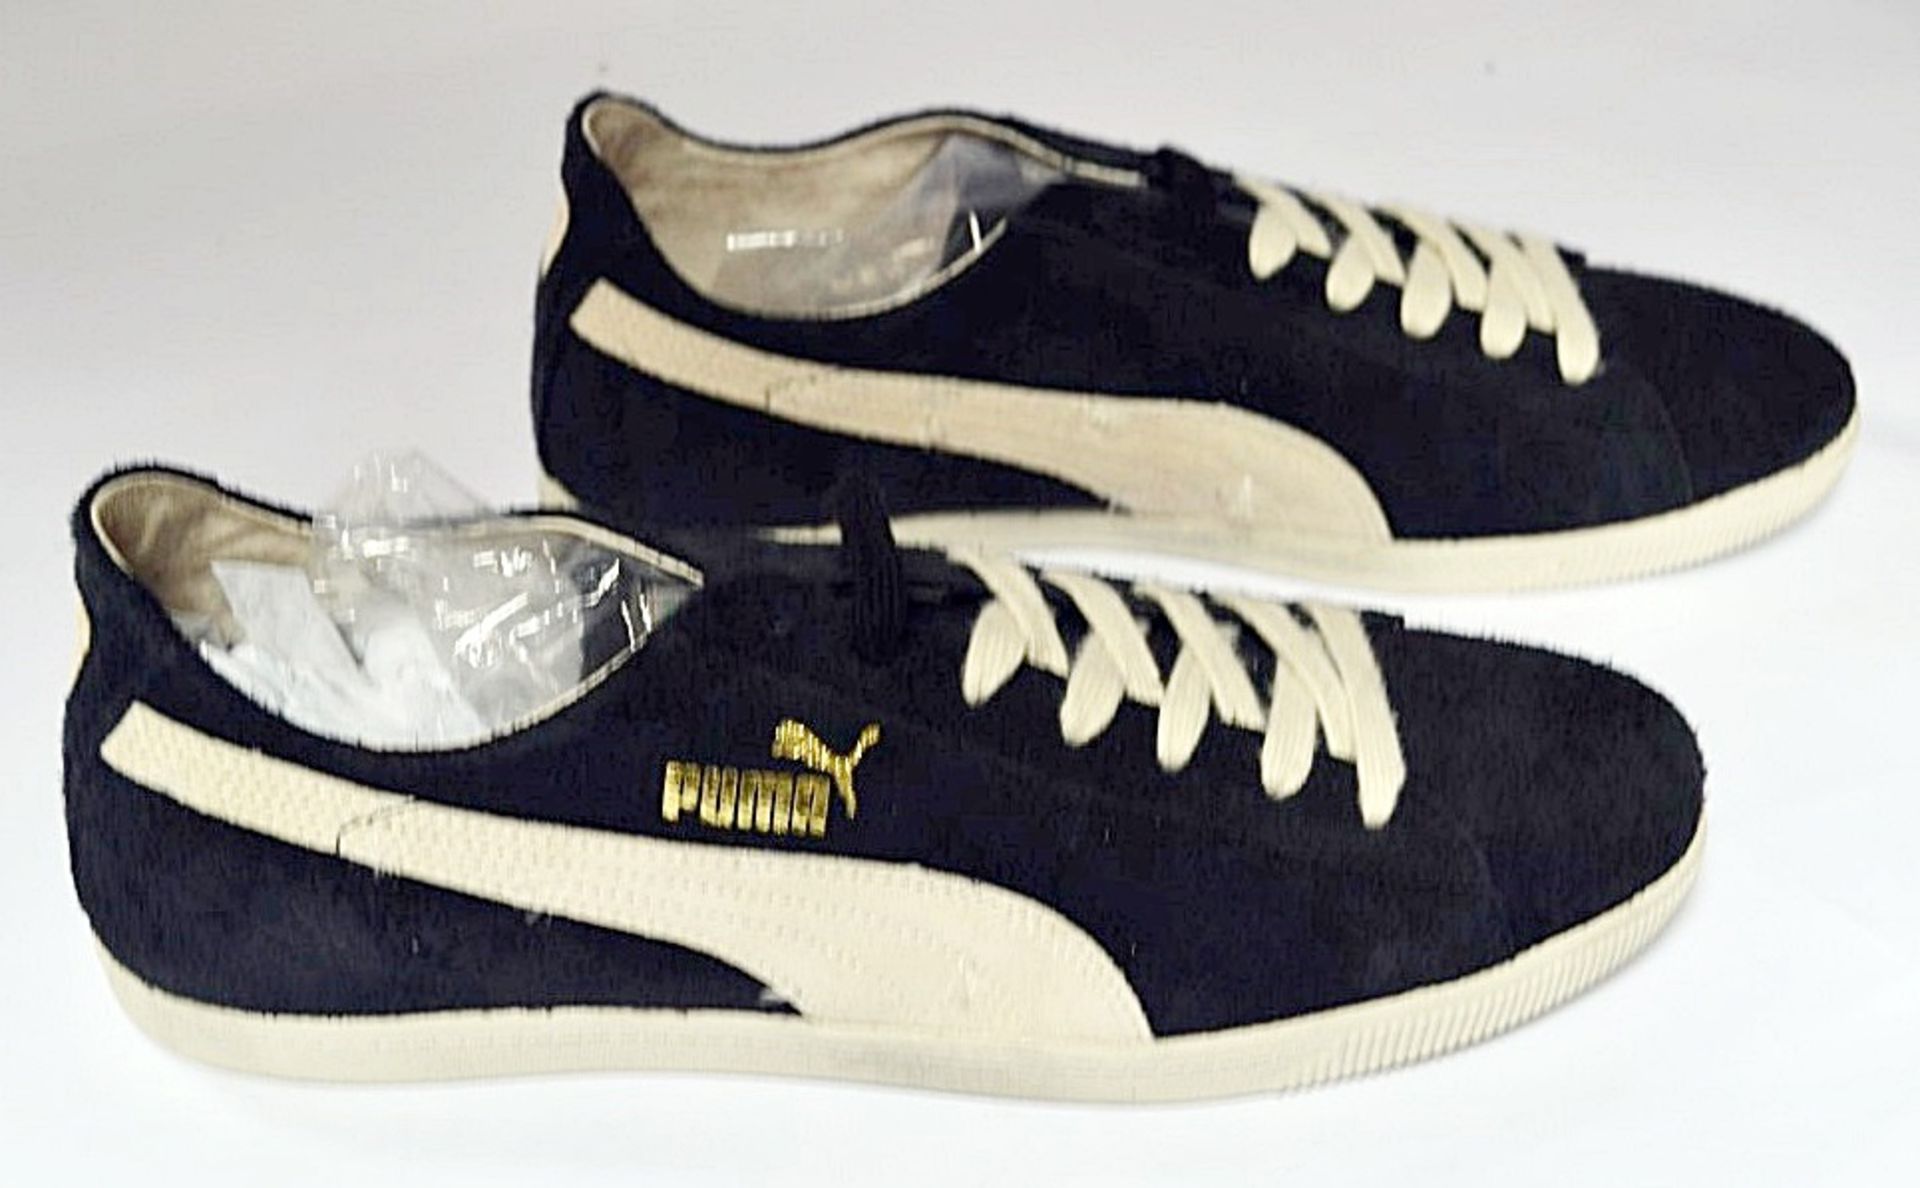 1 x Pair Of PUMA "Glyde Lo VTG" Mens Trainers - Size: Adult UK 9 1/2 - Colour: Black / Cream - CL155 - Image 3 of 6